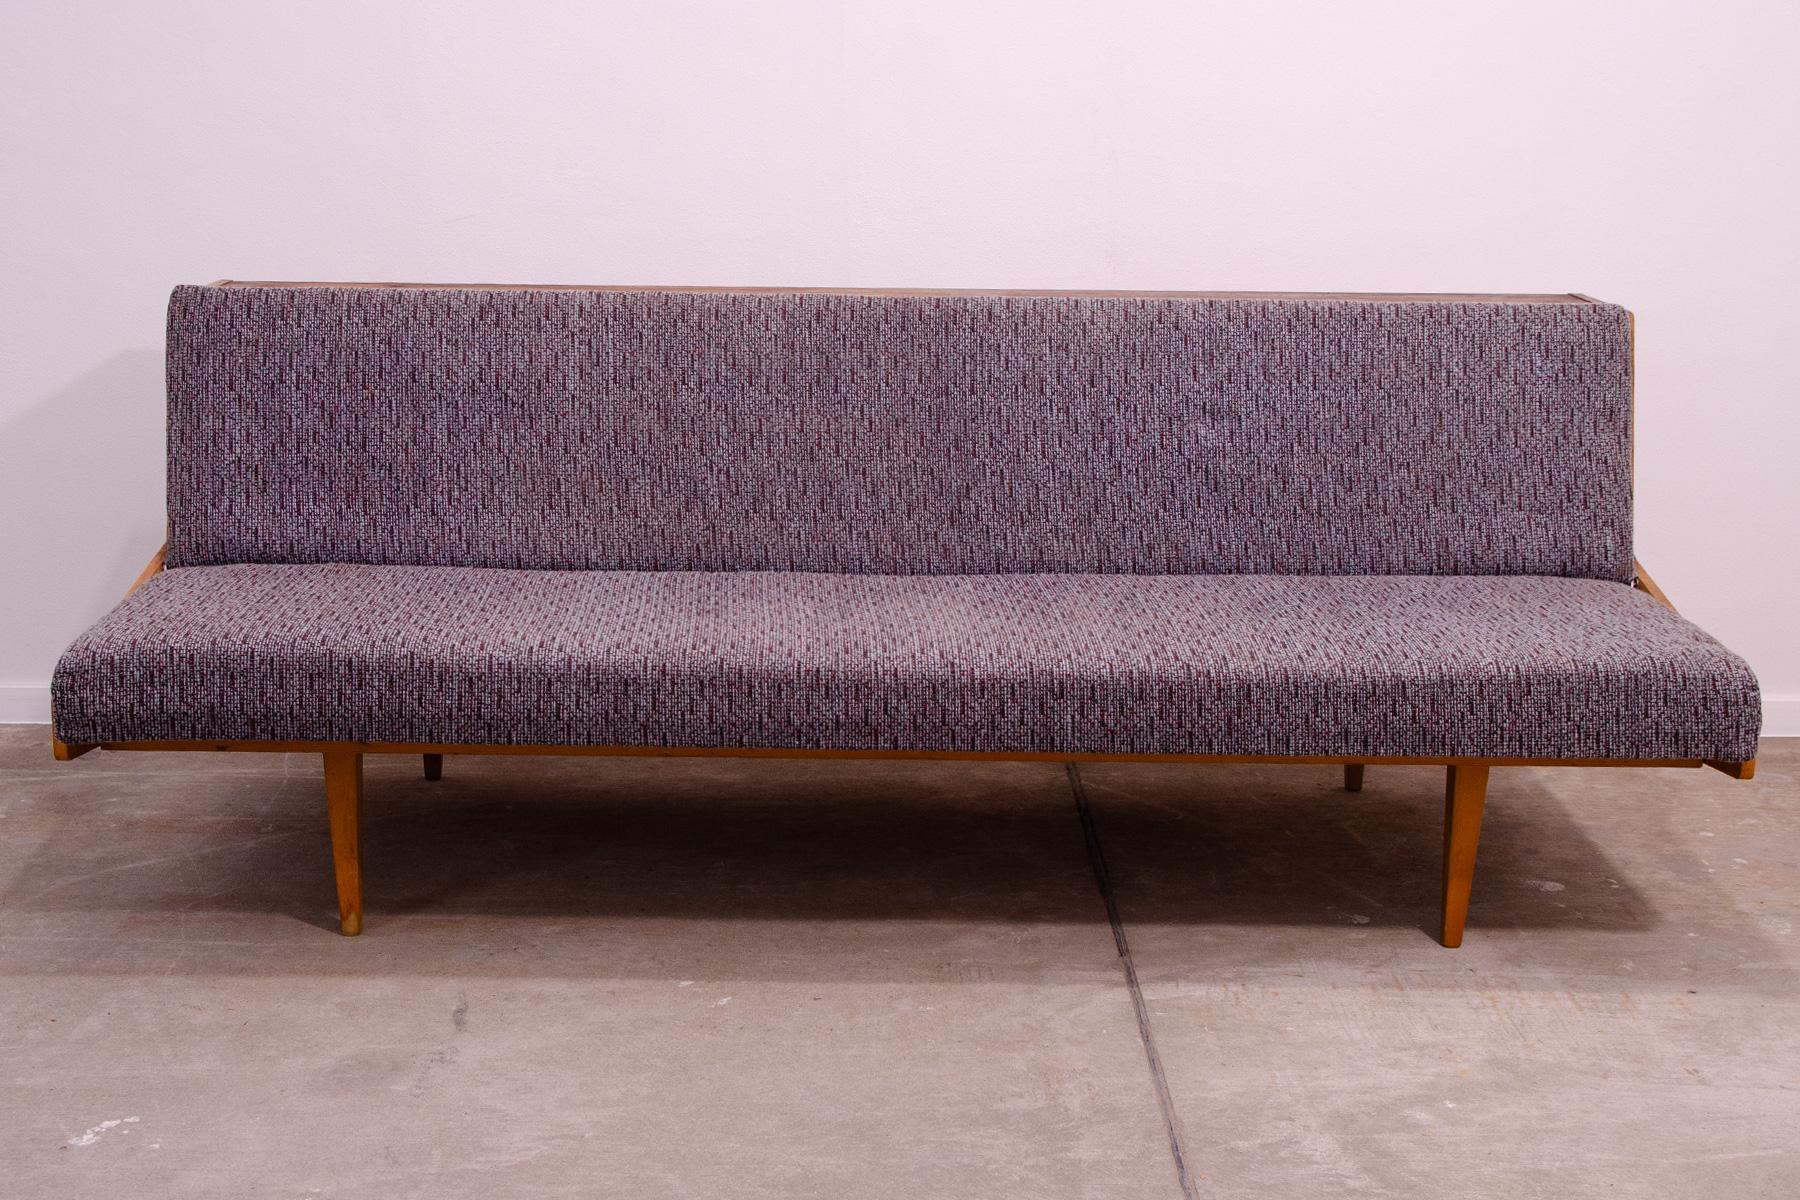 Midcentury sofa bed made in the former Czechoslovakia in the 1970s. It was made by Tatra nábytok company. The sofa has a wooden structure with ash wood veneer, overall it´s in good Vintage condition, the cushions show signs of age and